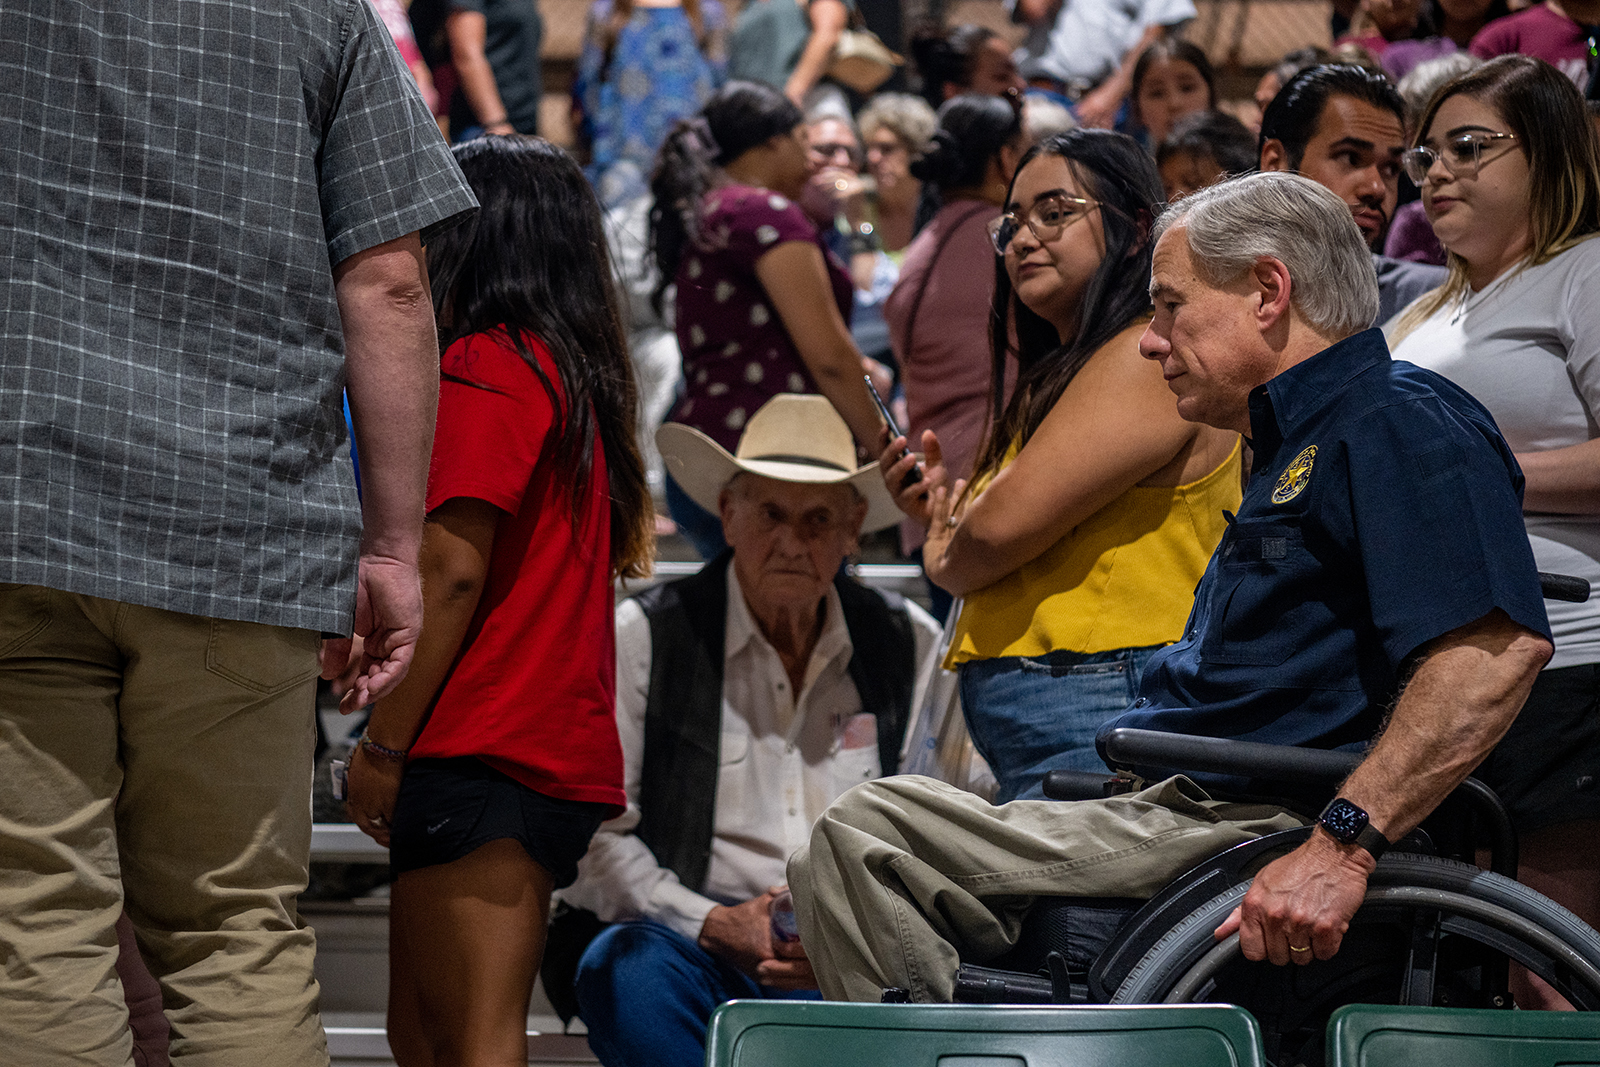 Texas Gov. Greg Abbott during a community-held vigil for the 21 people killed at Robb Elementary School, on May 25 in Uvalde, Texas.